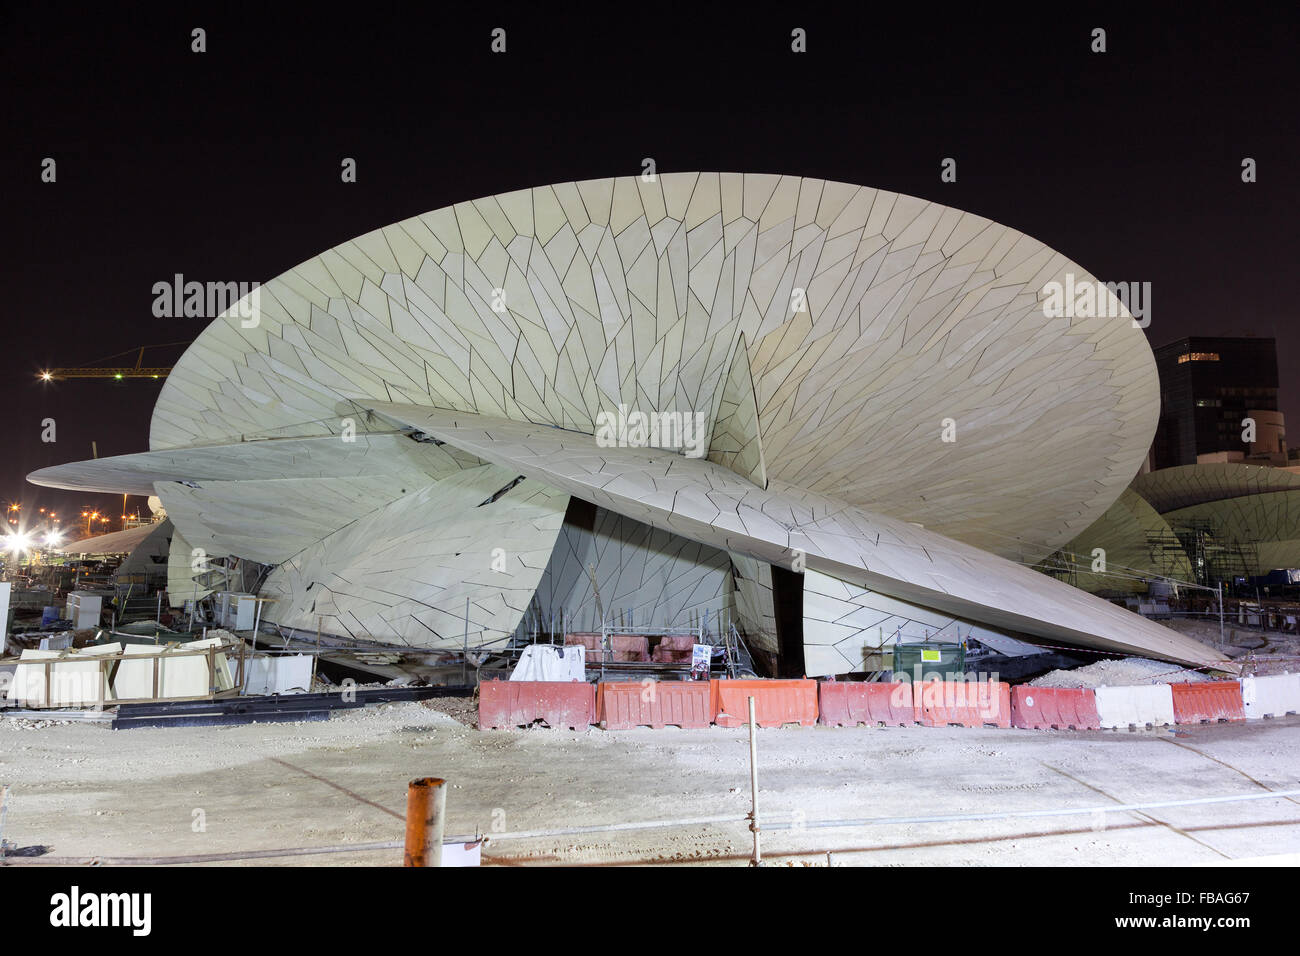 Construction site of the Qatar National Museum at night Stock Photo